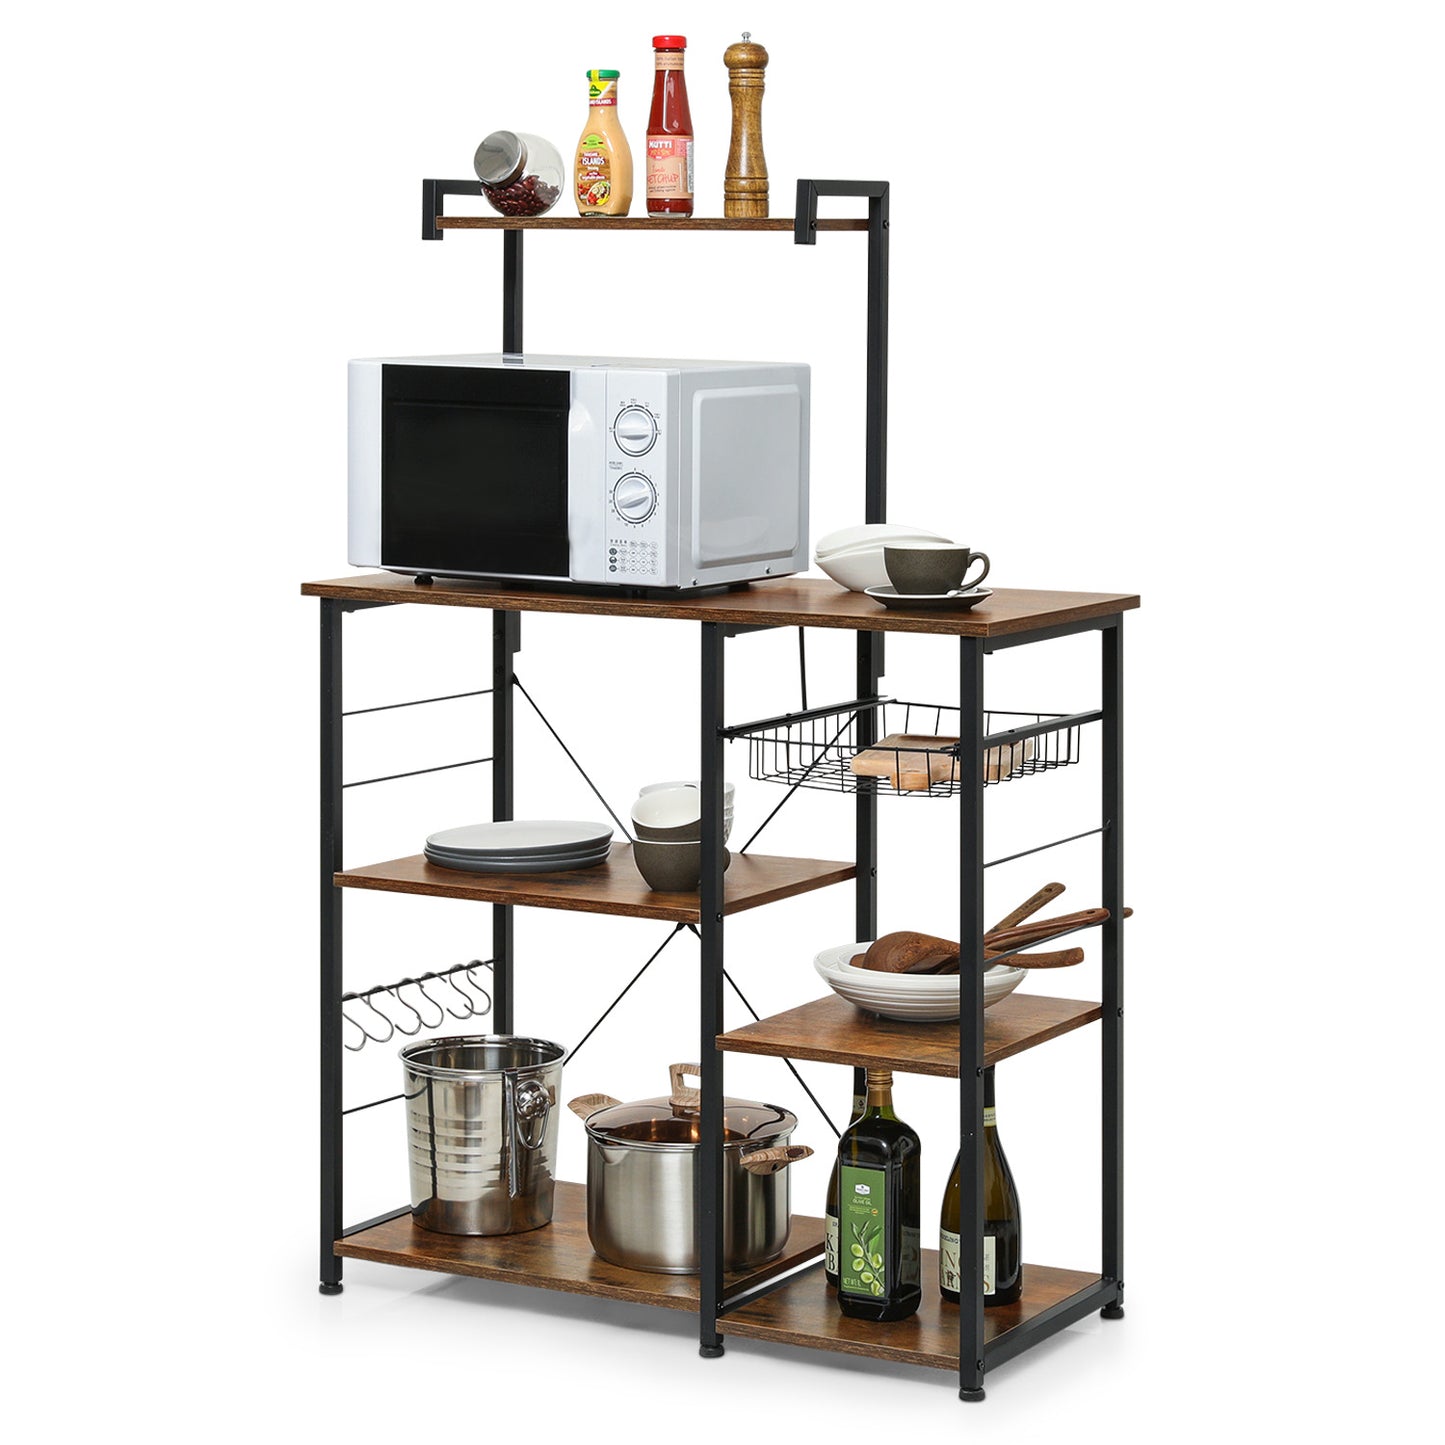 Kitchen Baker's Rack 35.5"x16"x52" - with Movable Basket